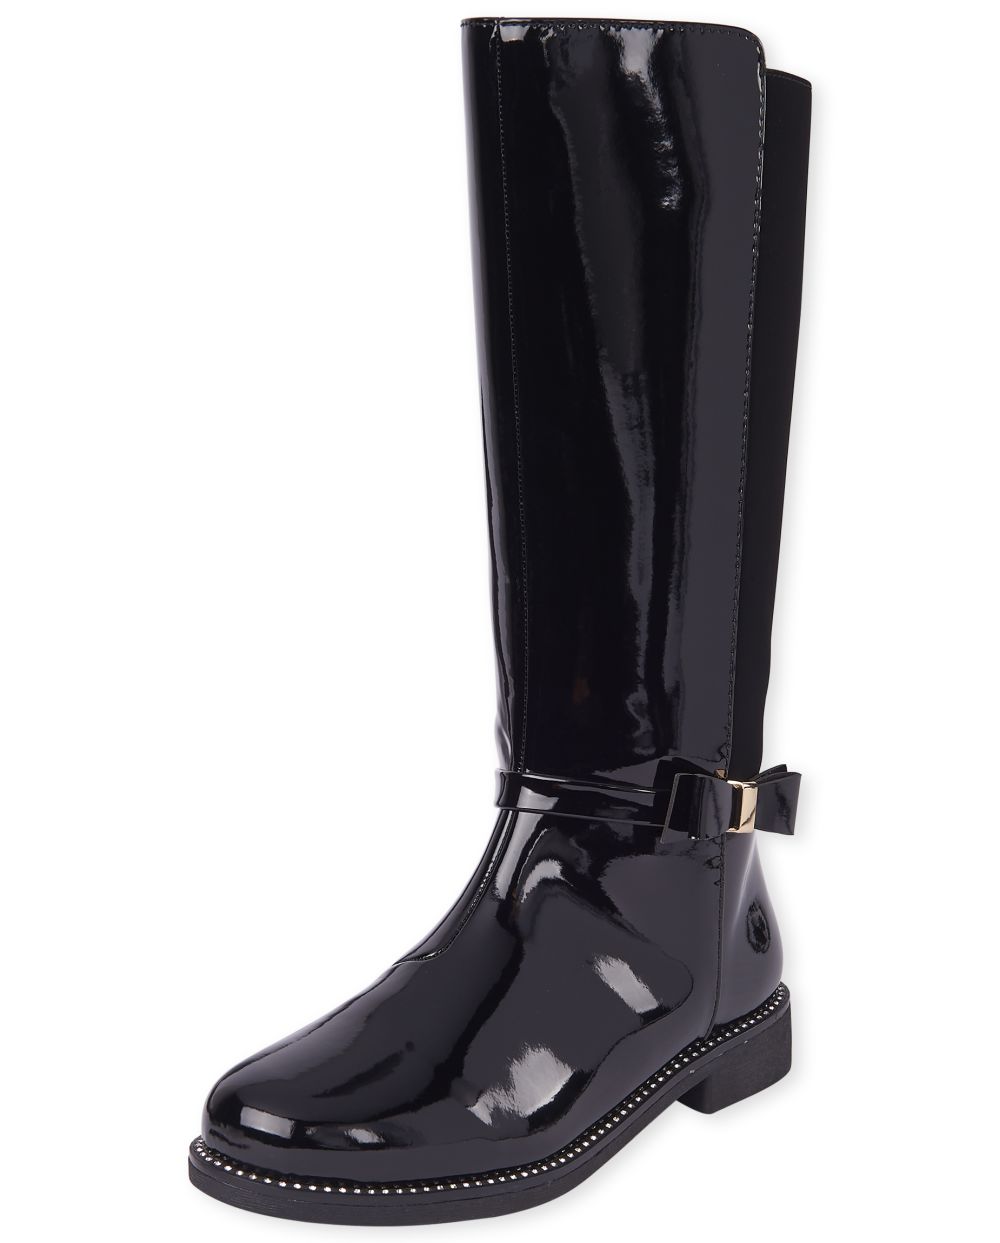 

Girls Bow Faux Patent Leather Tall Boots - Black - The Children's Place